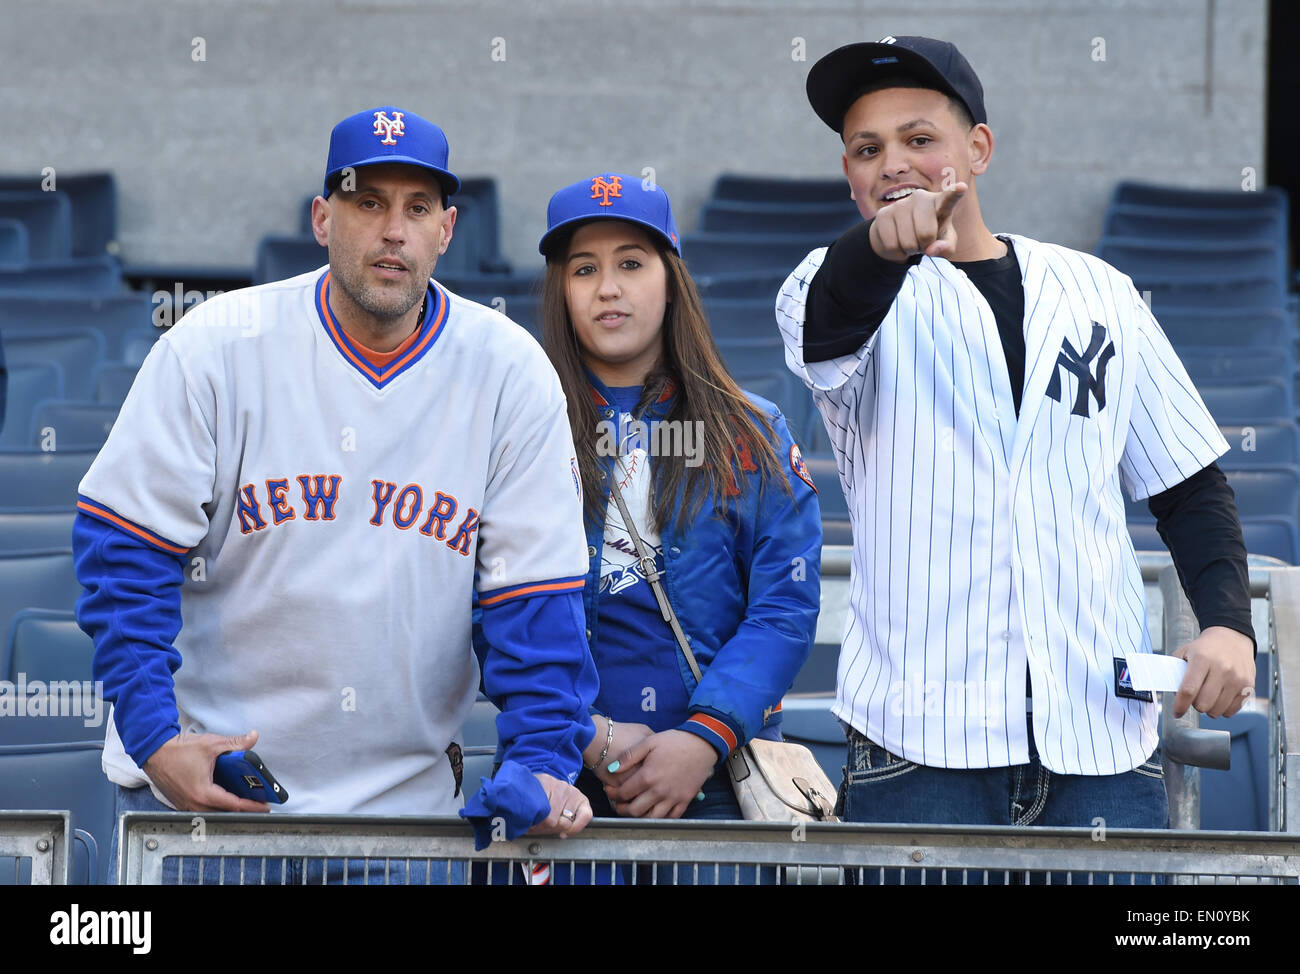 Bronx, New York, USA. 24th Apr, 2015. Fans ahead of tonights game, NY Yankees vs